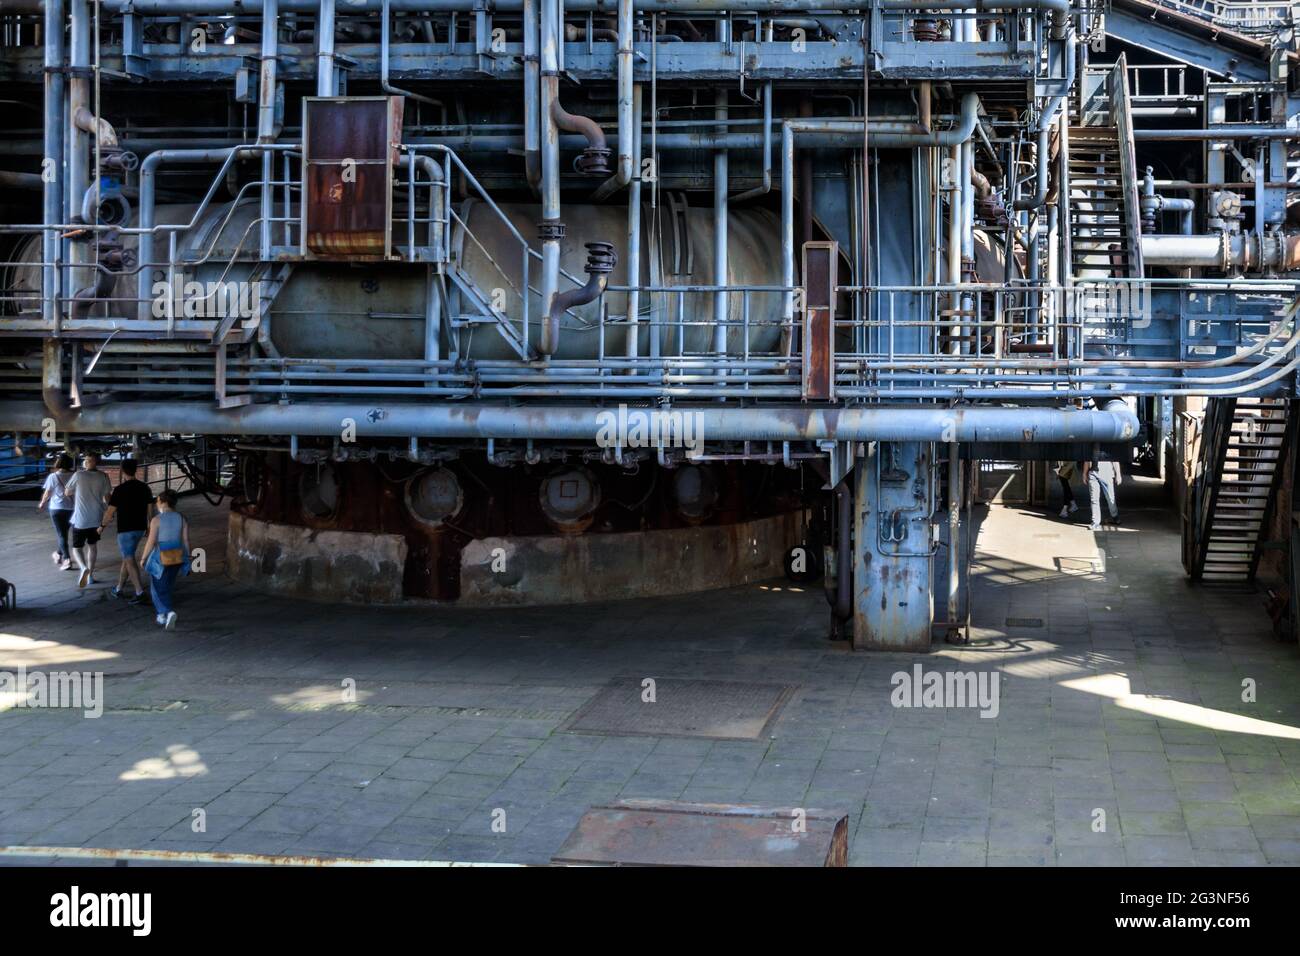 Visitors look at Industrial structures, Landschaftspark Duisburg-Nord, former ironworks and steel manufacturing, Duisburg, Ruhr, NRW, Germany Stock Photo